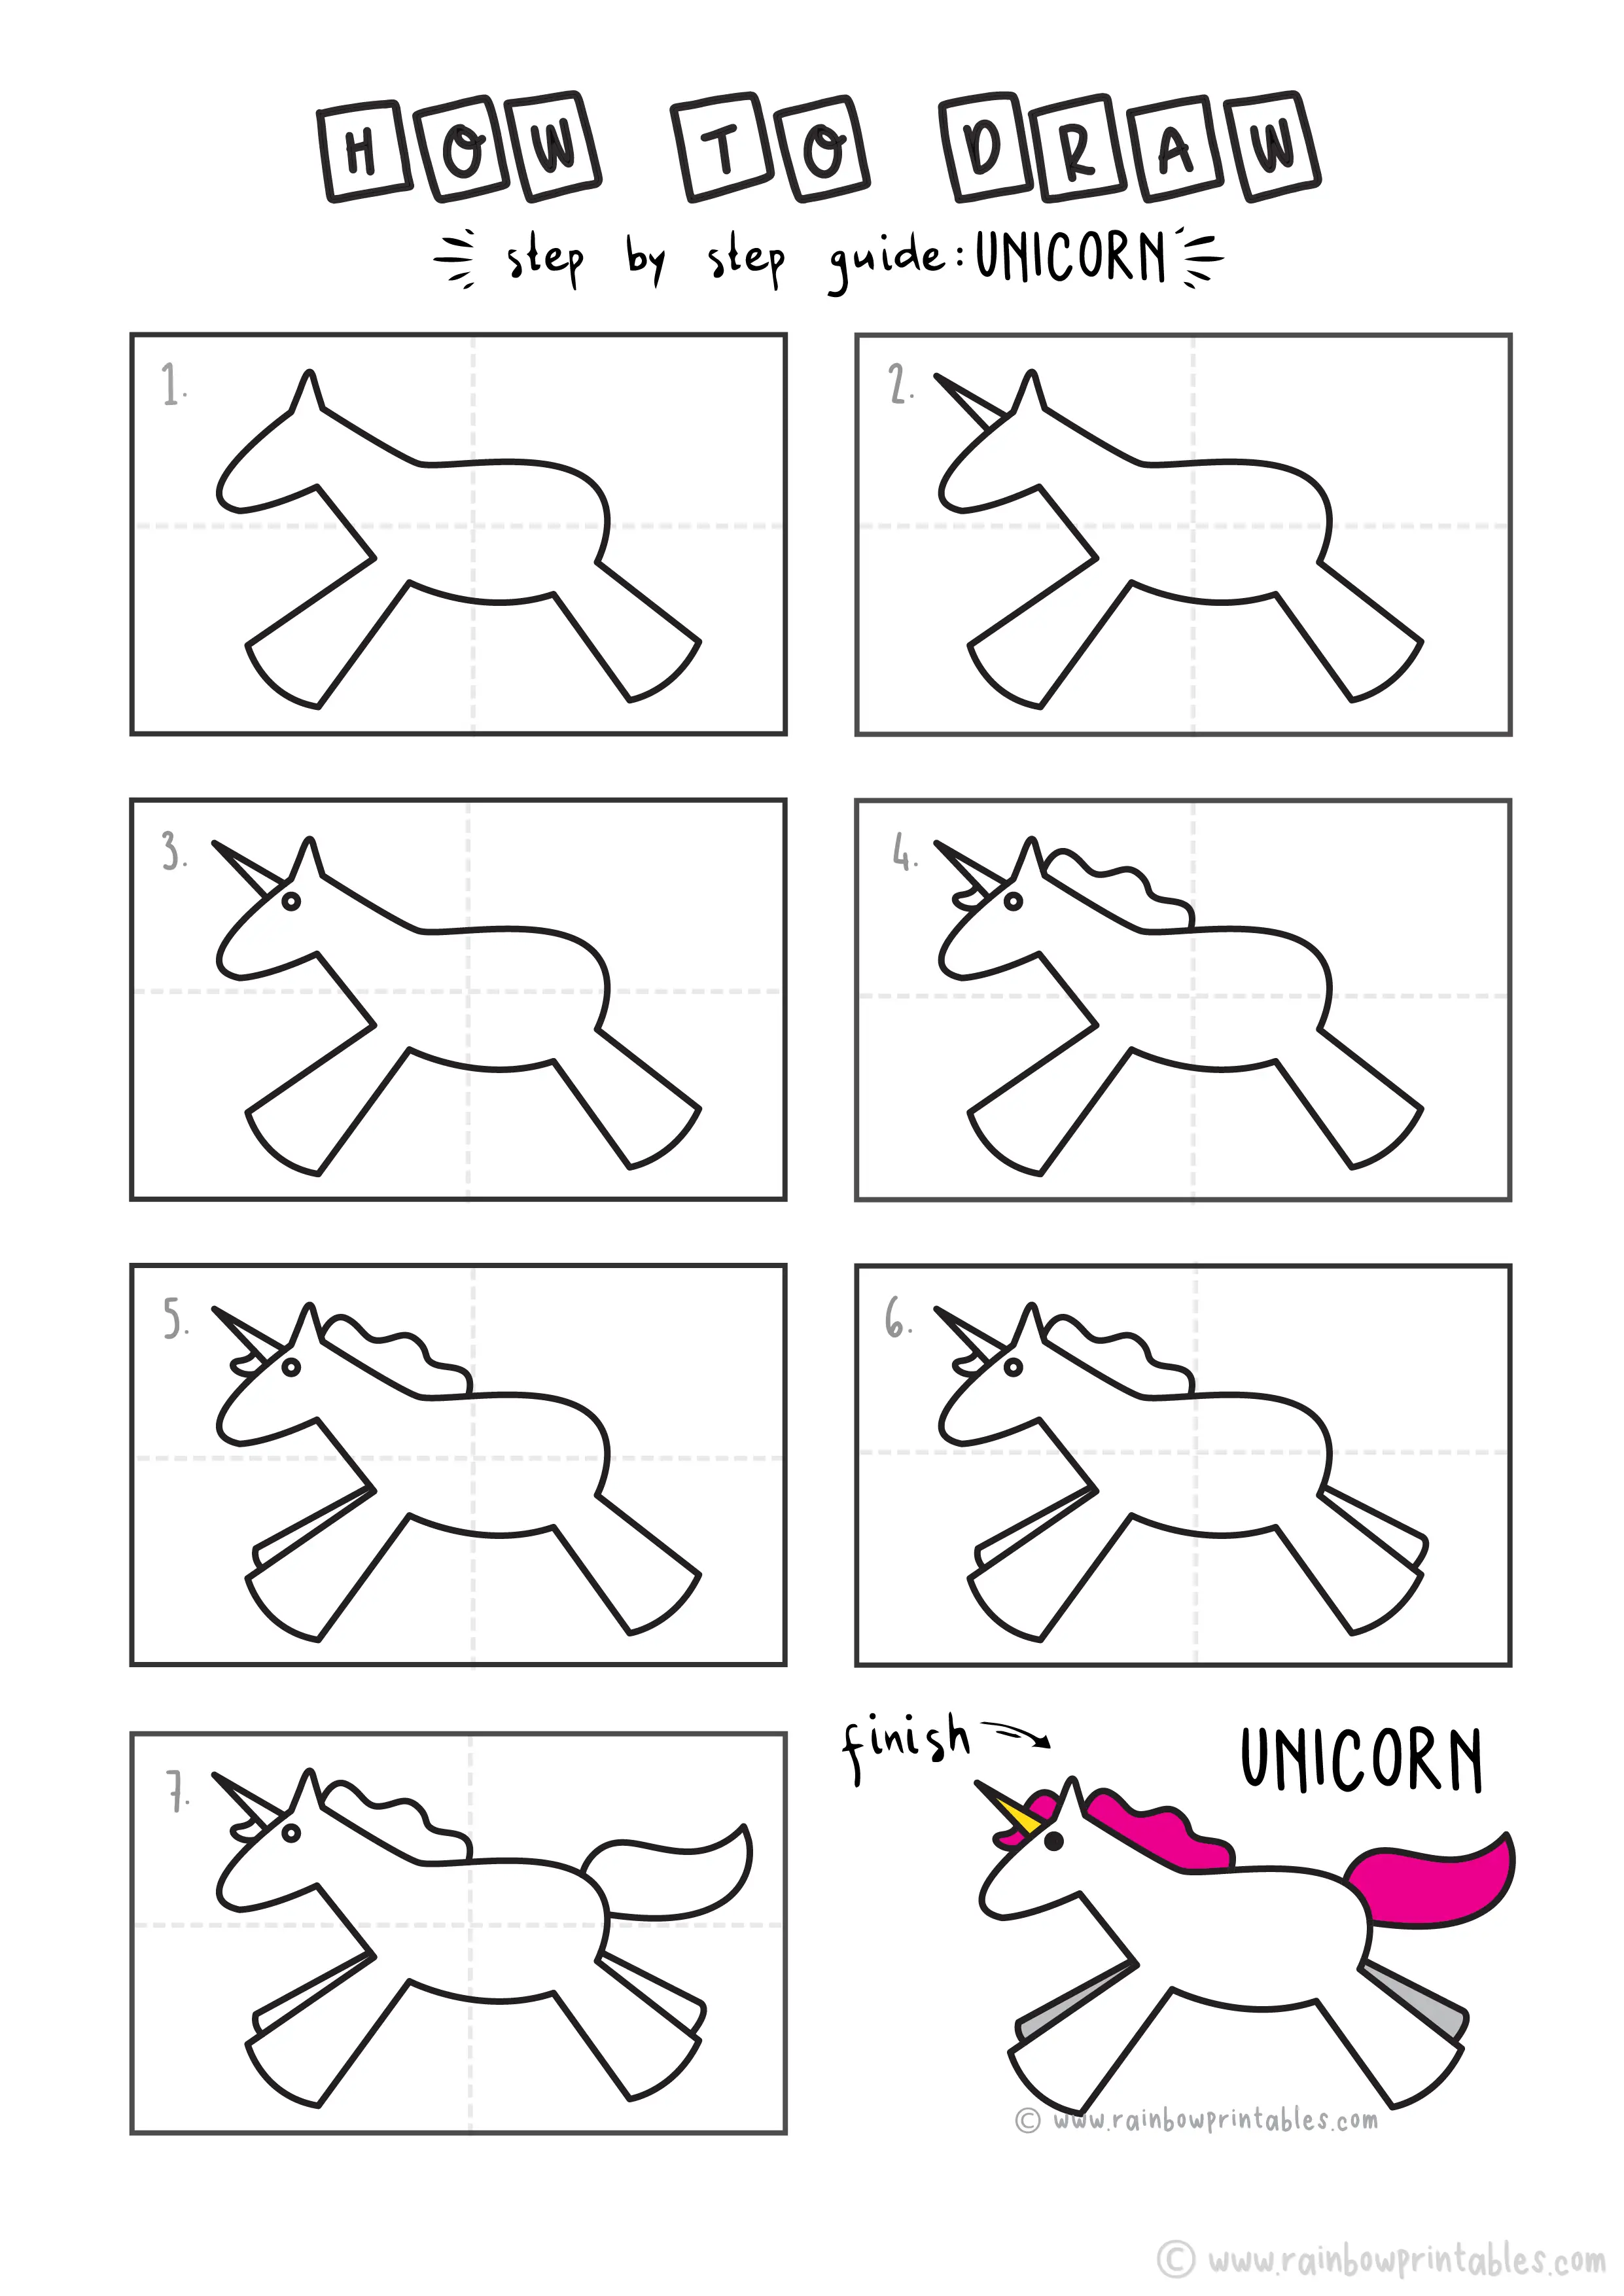 How To Draw a Unicorn Step by Step for Kids - Art Tutorial Project